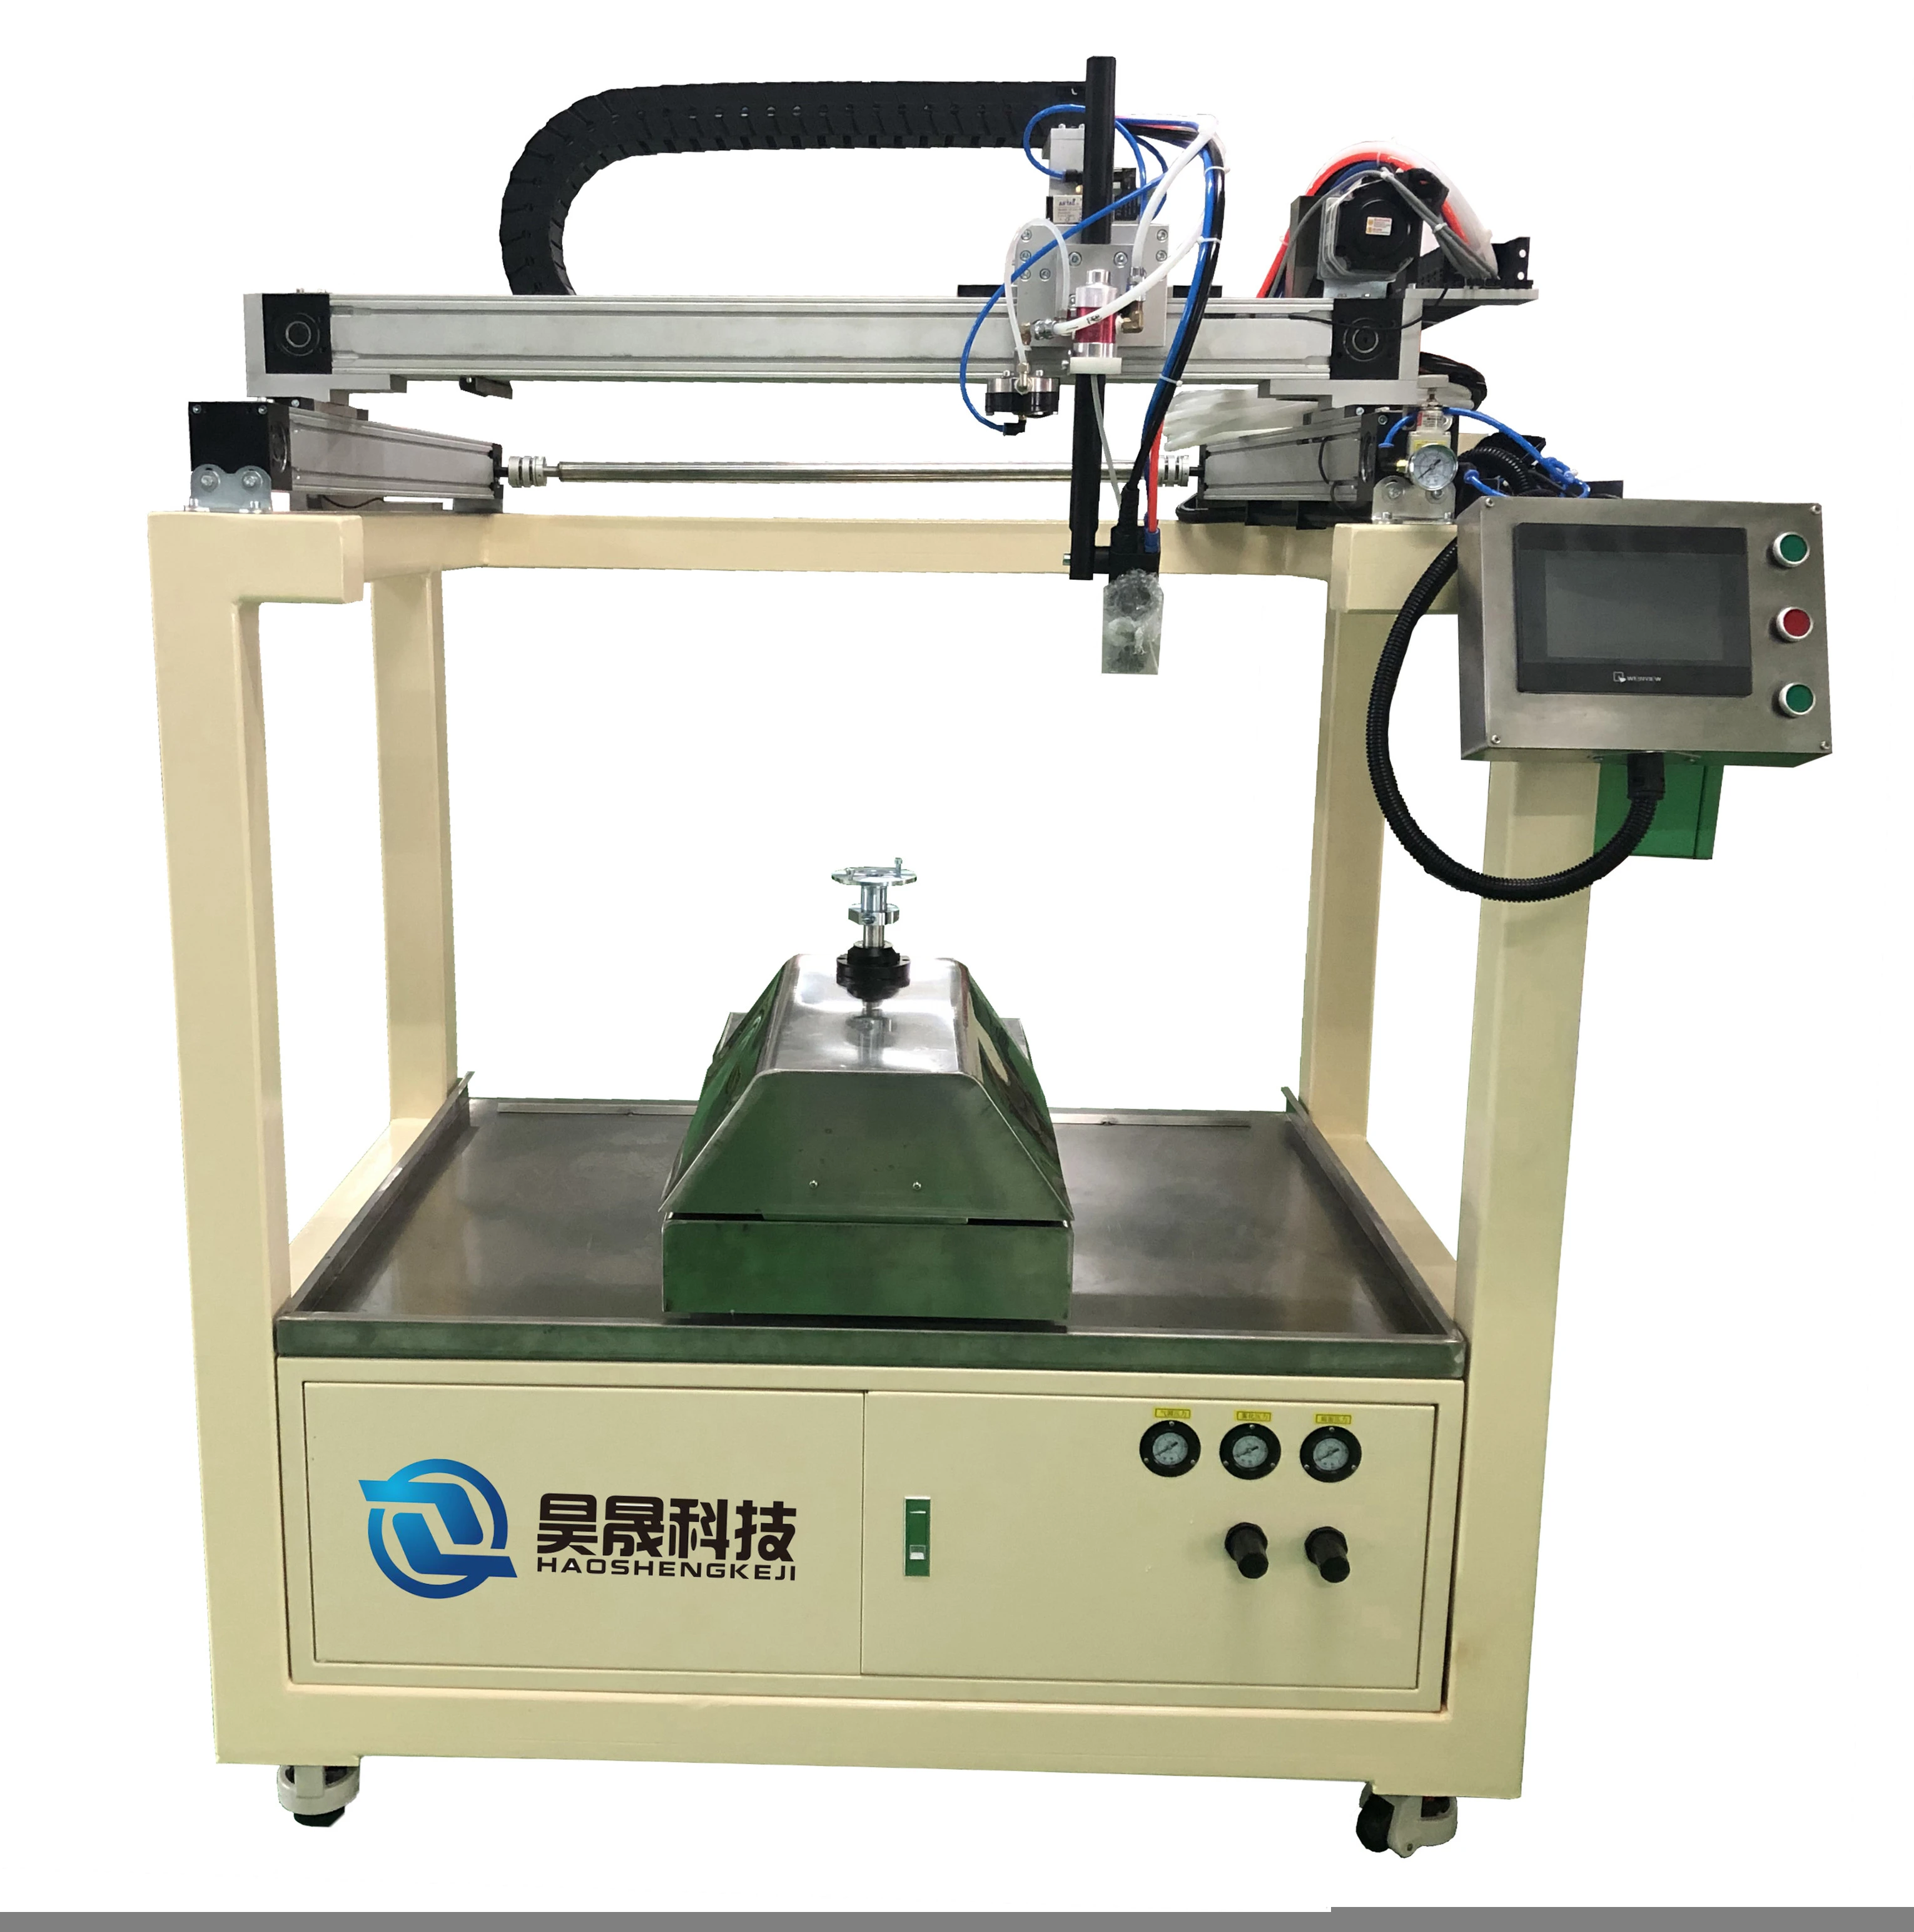 High efficiency industrial 2-Axis fully Automatic Paint Spray Machine for small parts and 3c digital